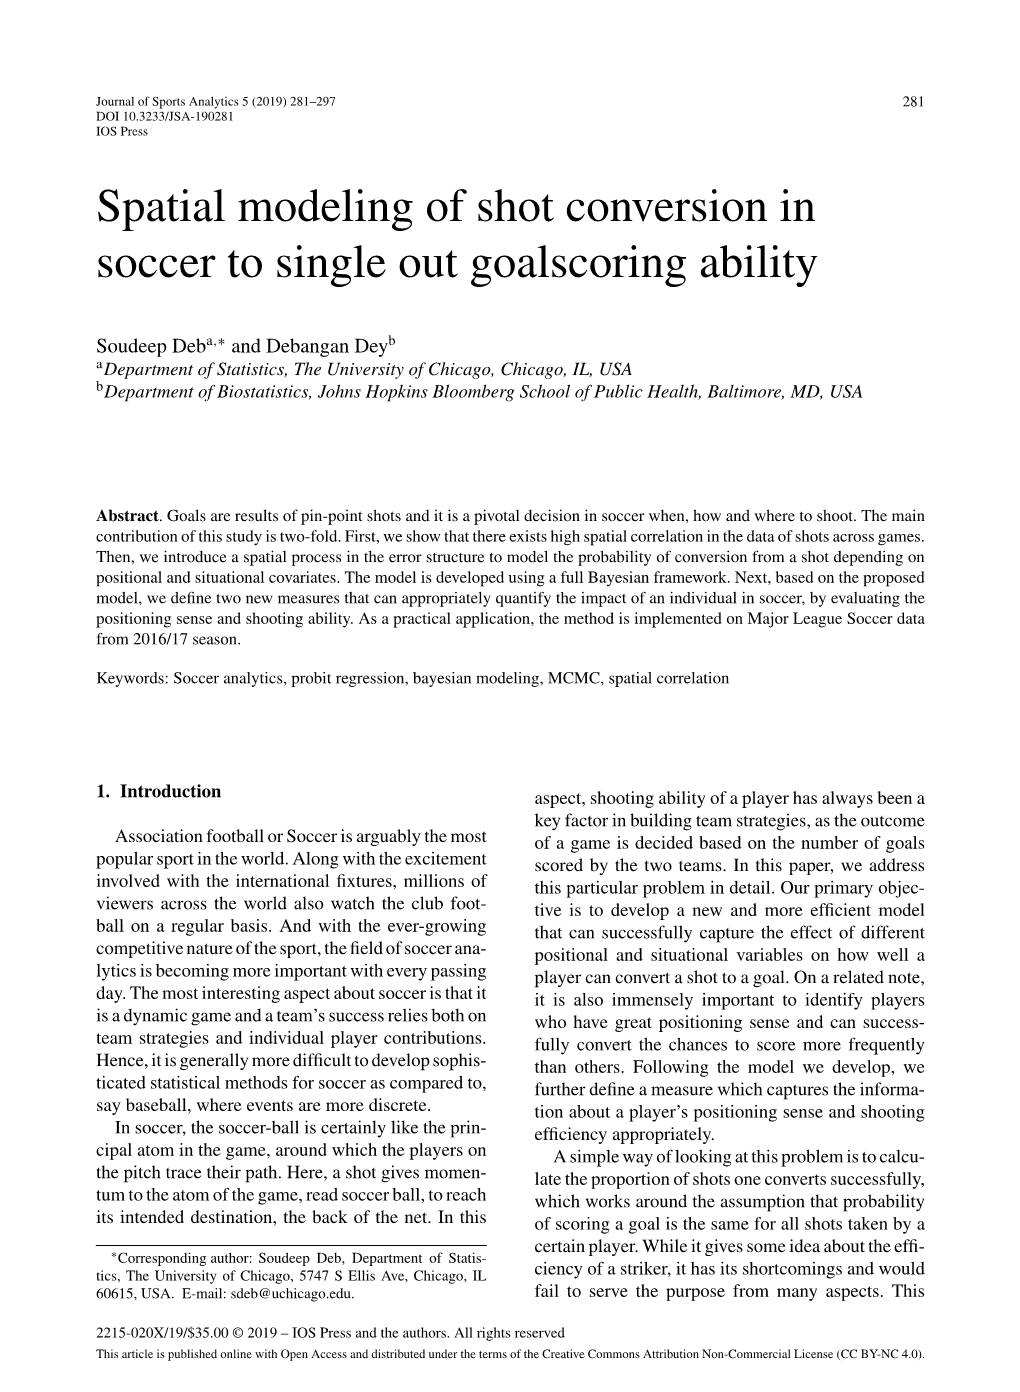 Spatial Modeling of Shot Conversion in Soccer to Single out Goalscoring Ability